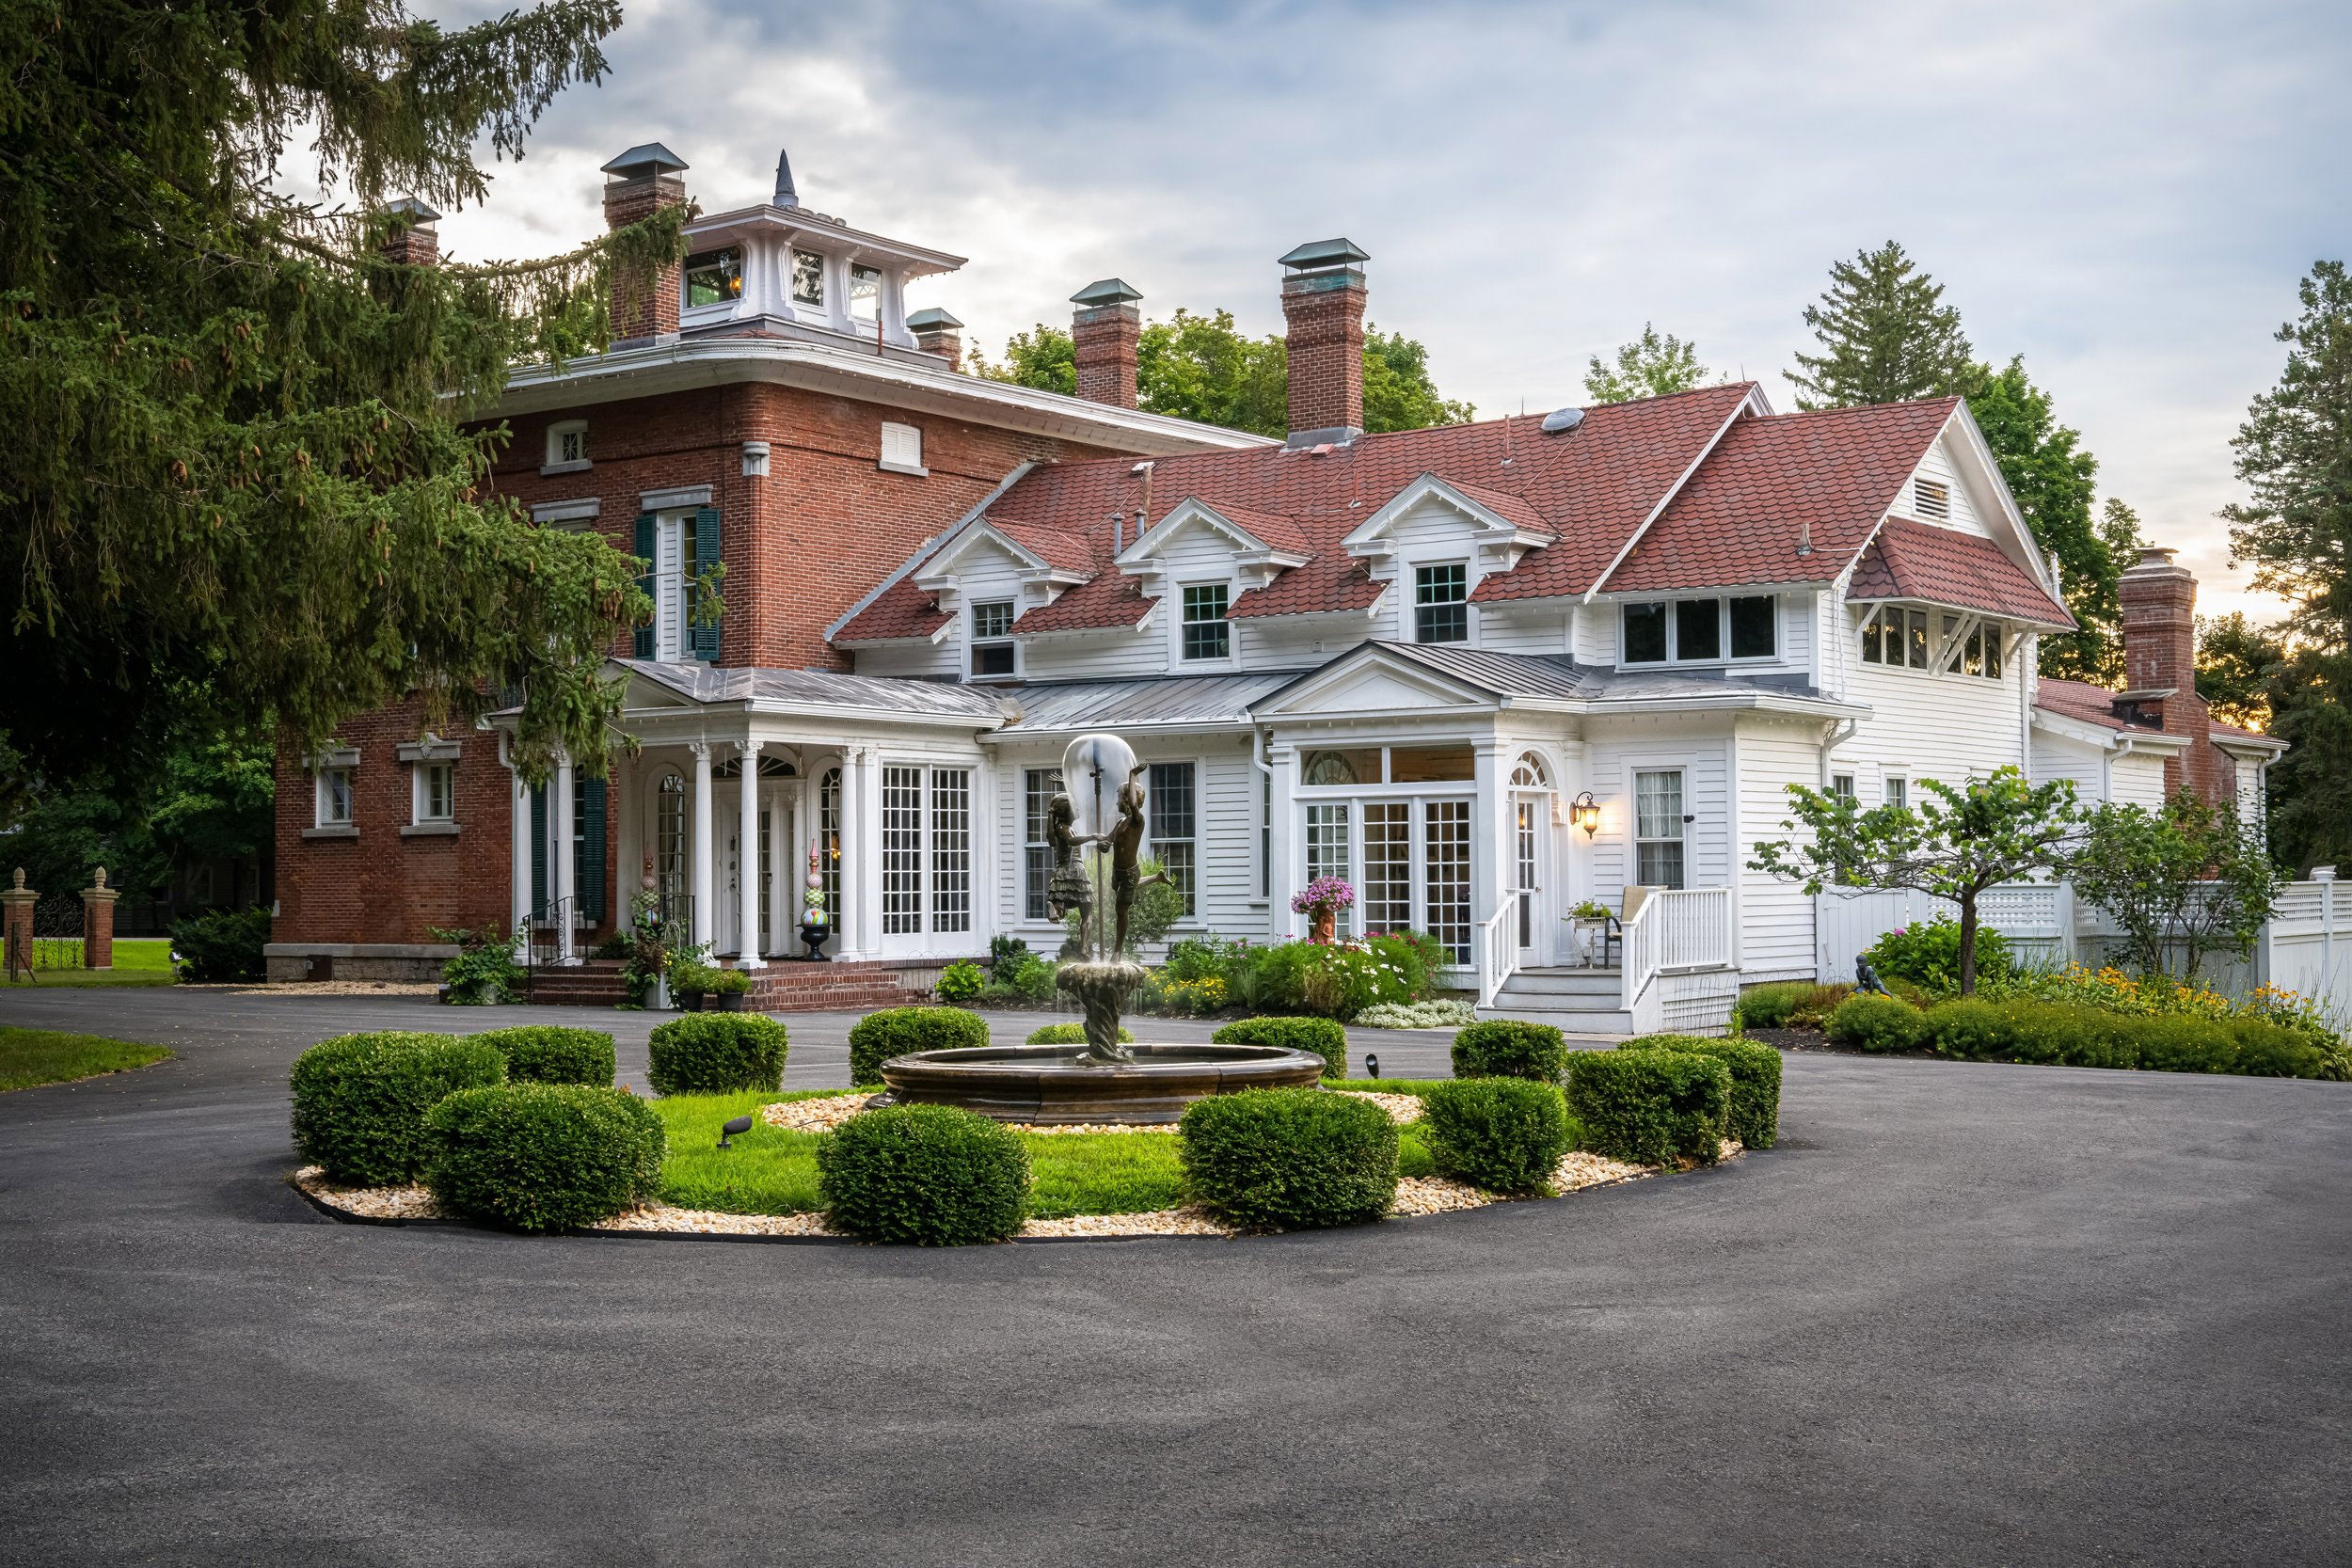 The White Estate in New York State - the exterior.